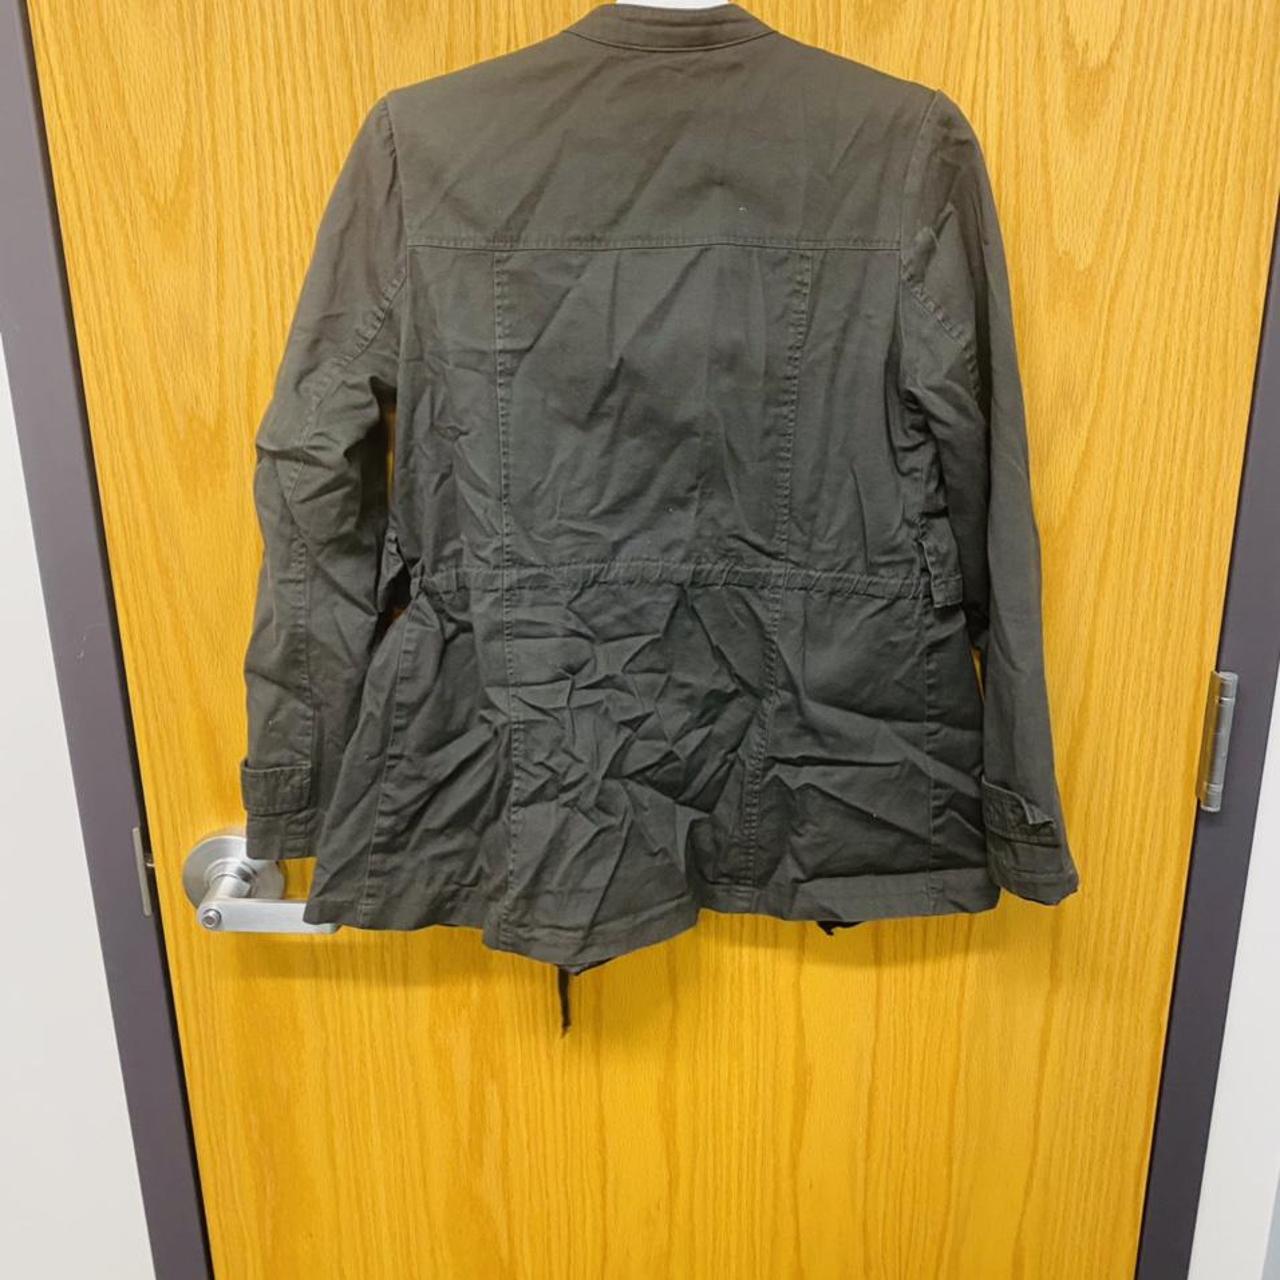 Product Image 2 - Jacket from target